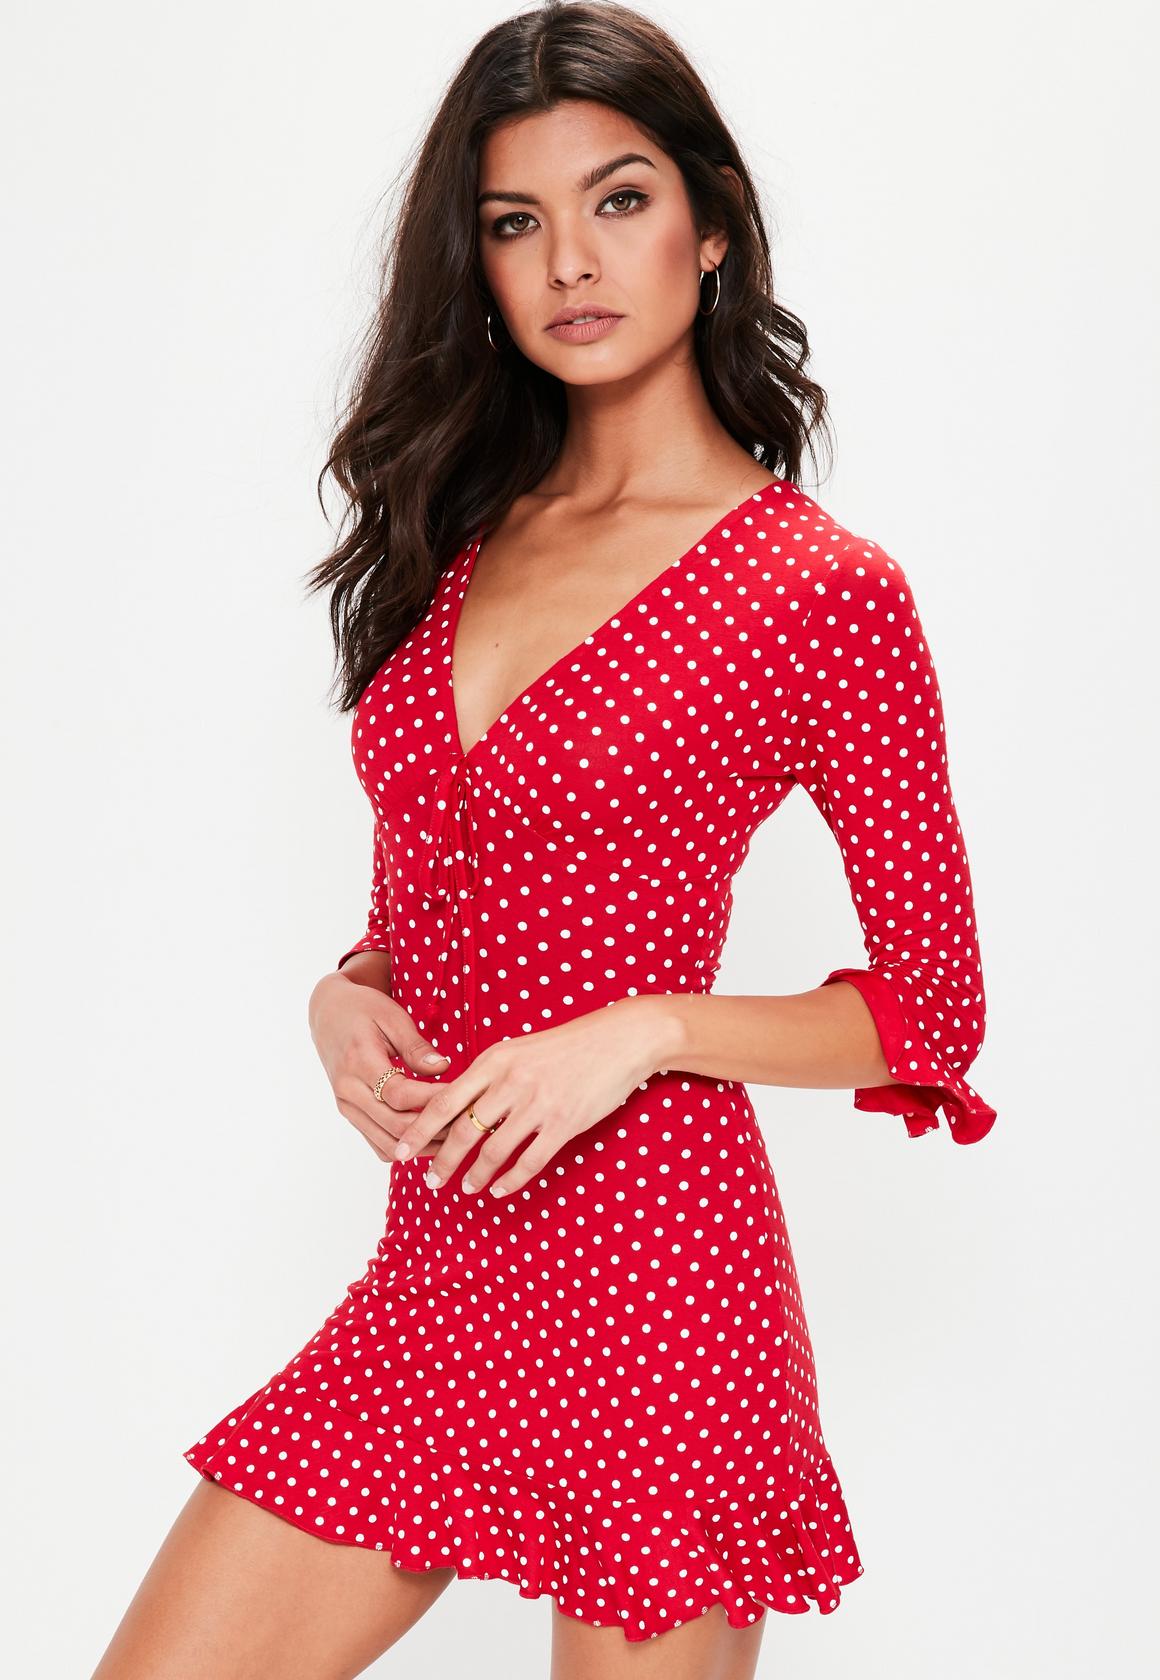 Are Polka Dots Back On Trend This Summer? | Fashion News ...